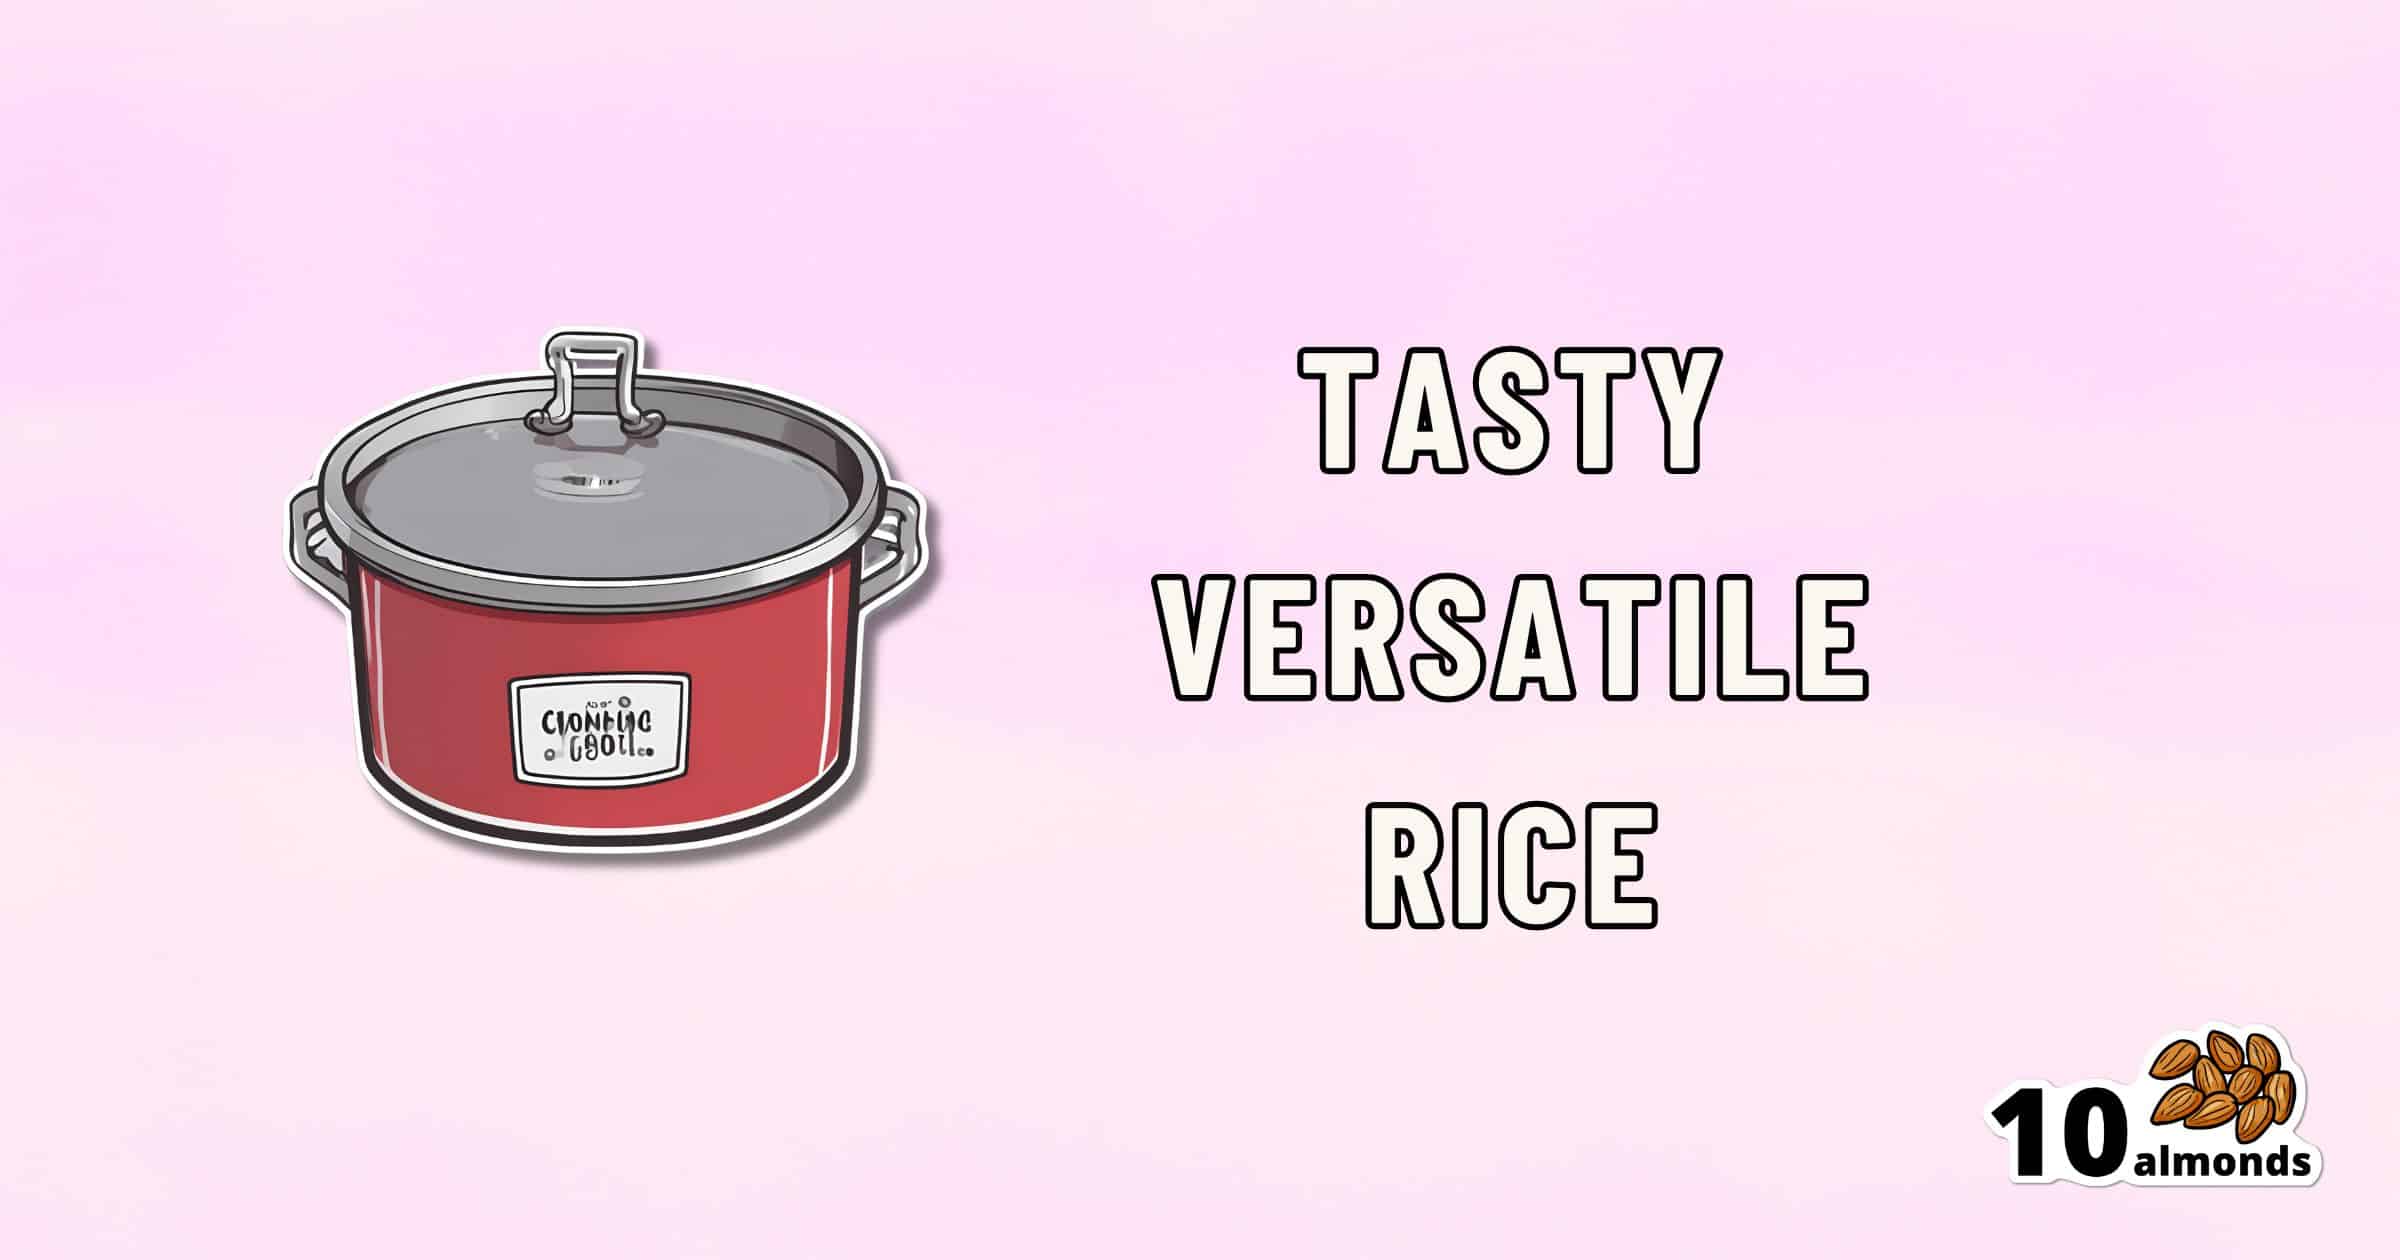 A red cooking pot with a lid is shown on a soft gradient pink background. The text "Tasty Versatile Rice" is written next to the pot. In the bottom right corner, there is an image of 10 almonds, highlighting how versatile this ingredient can be in delightful recipes.